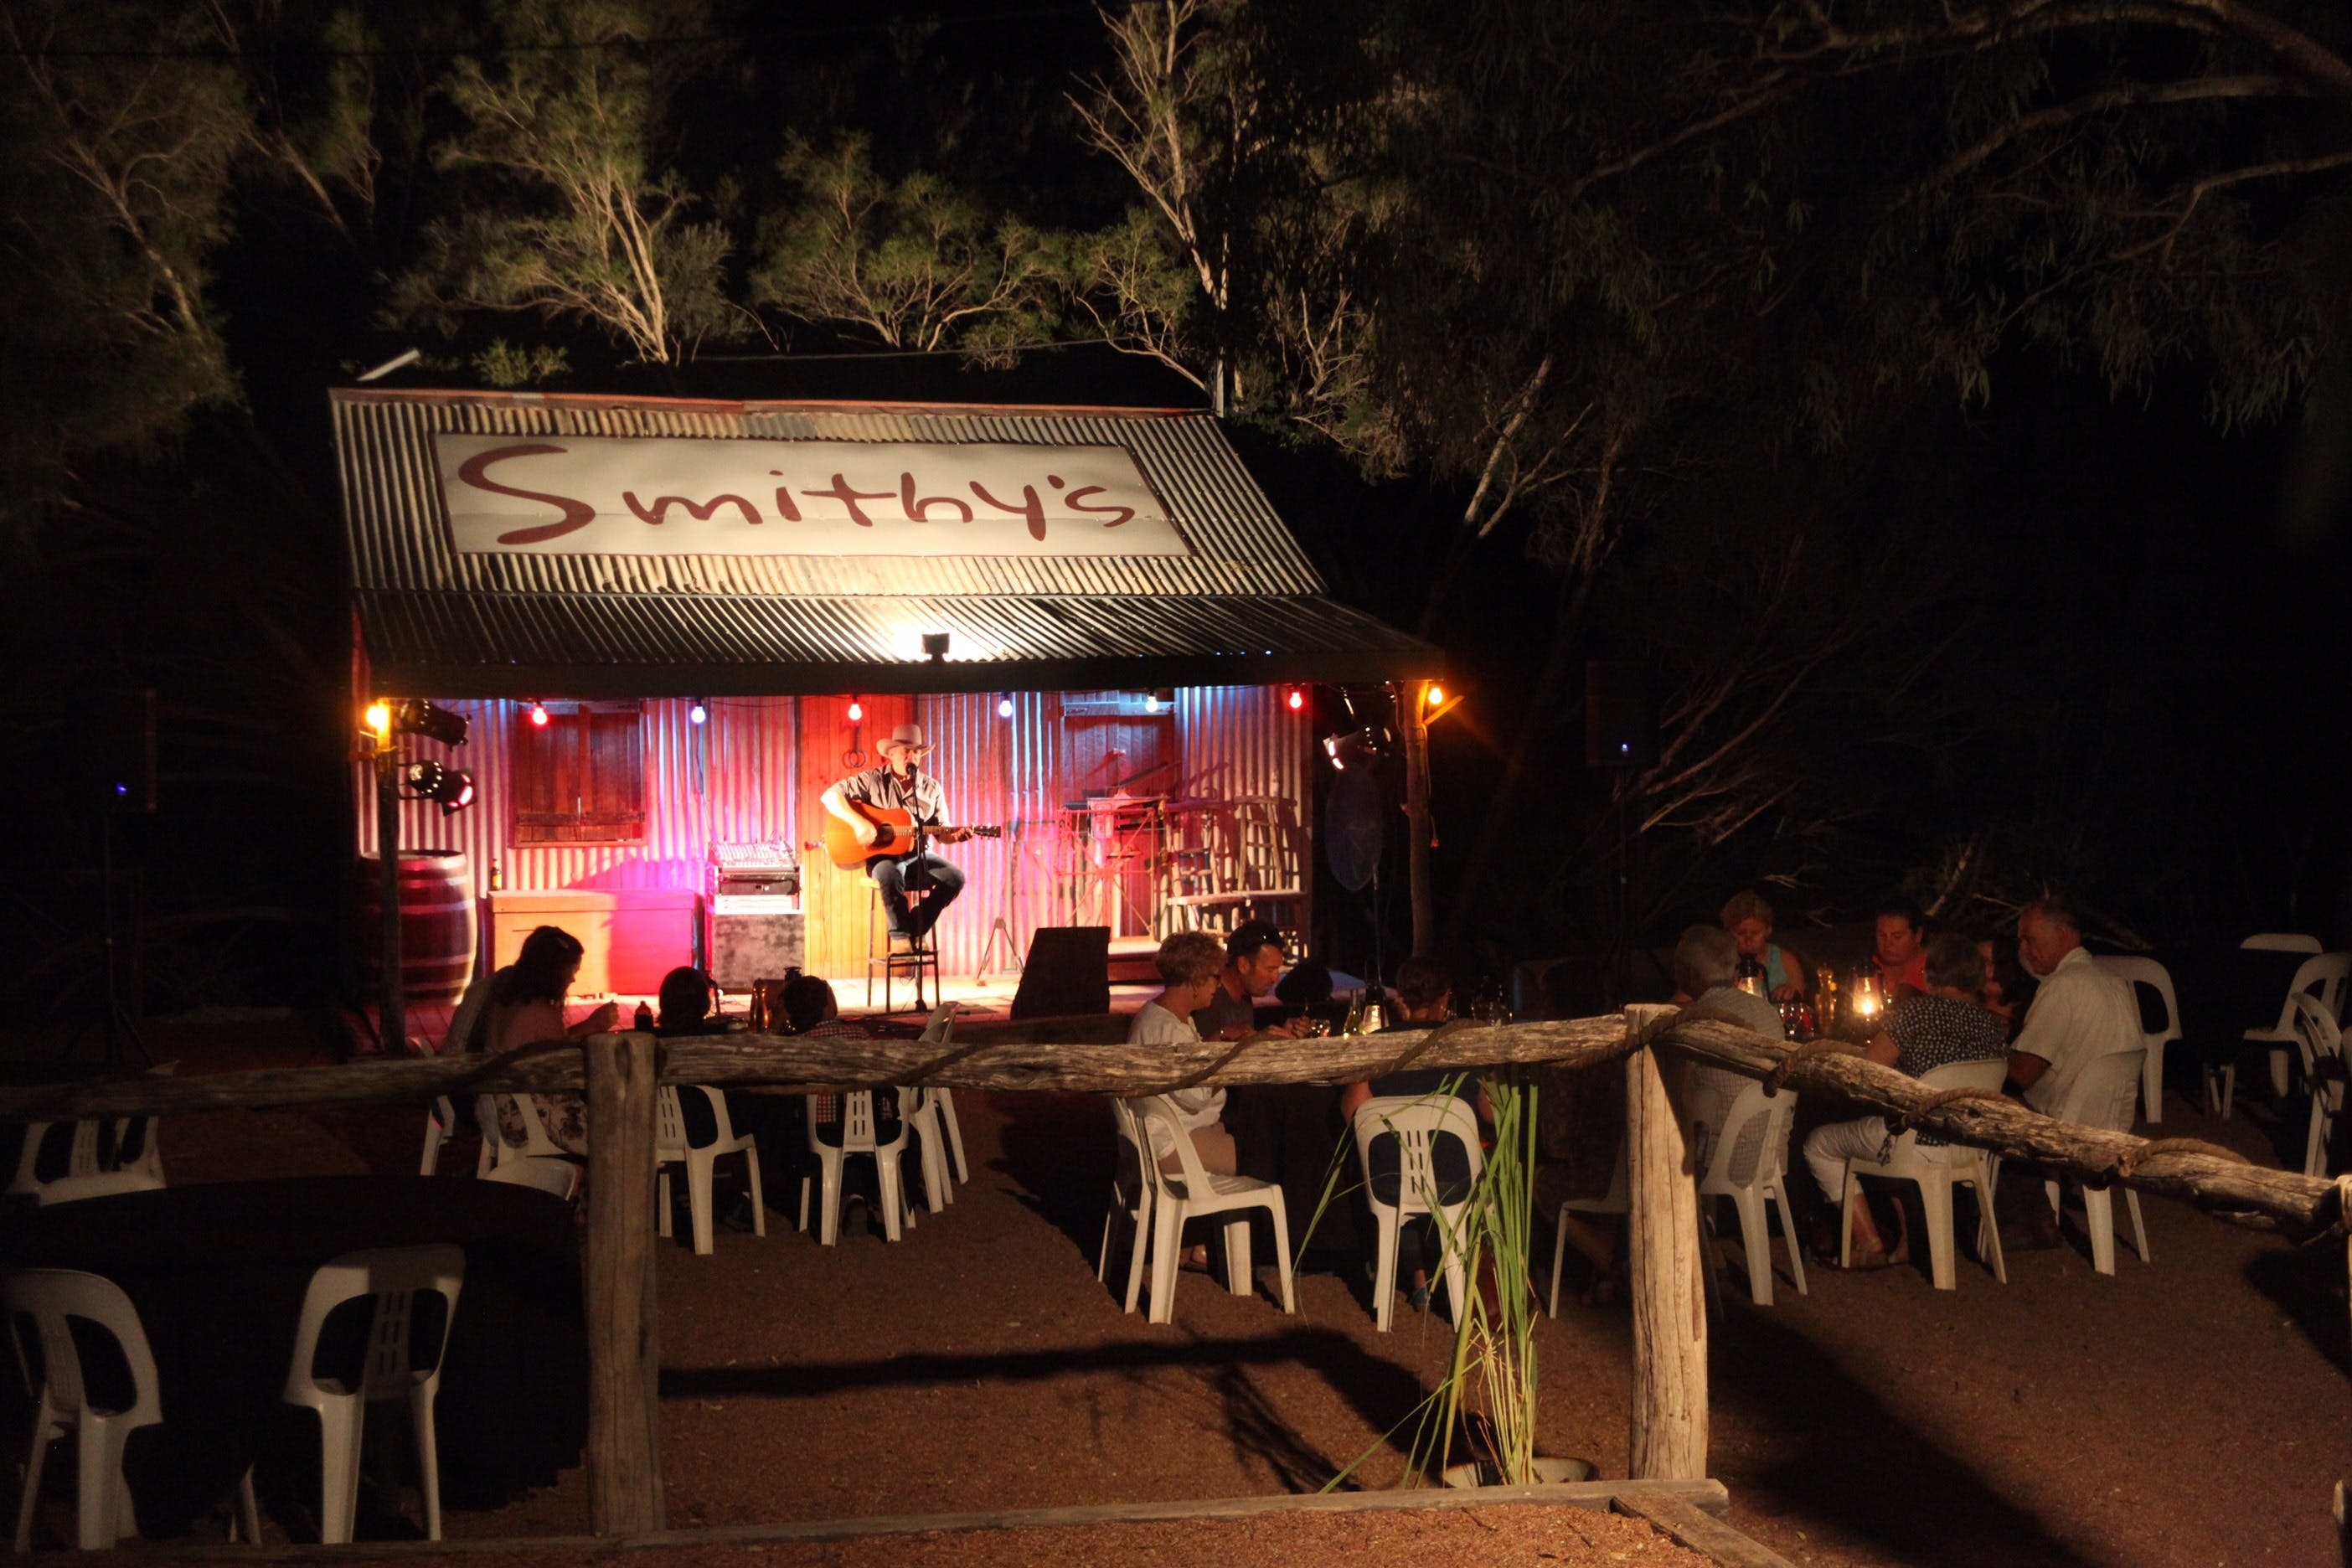 Smithy's Outback Dinner and Show - Tourism Adelaide